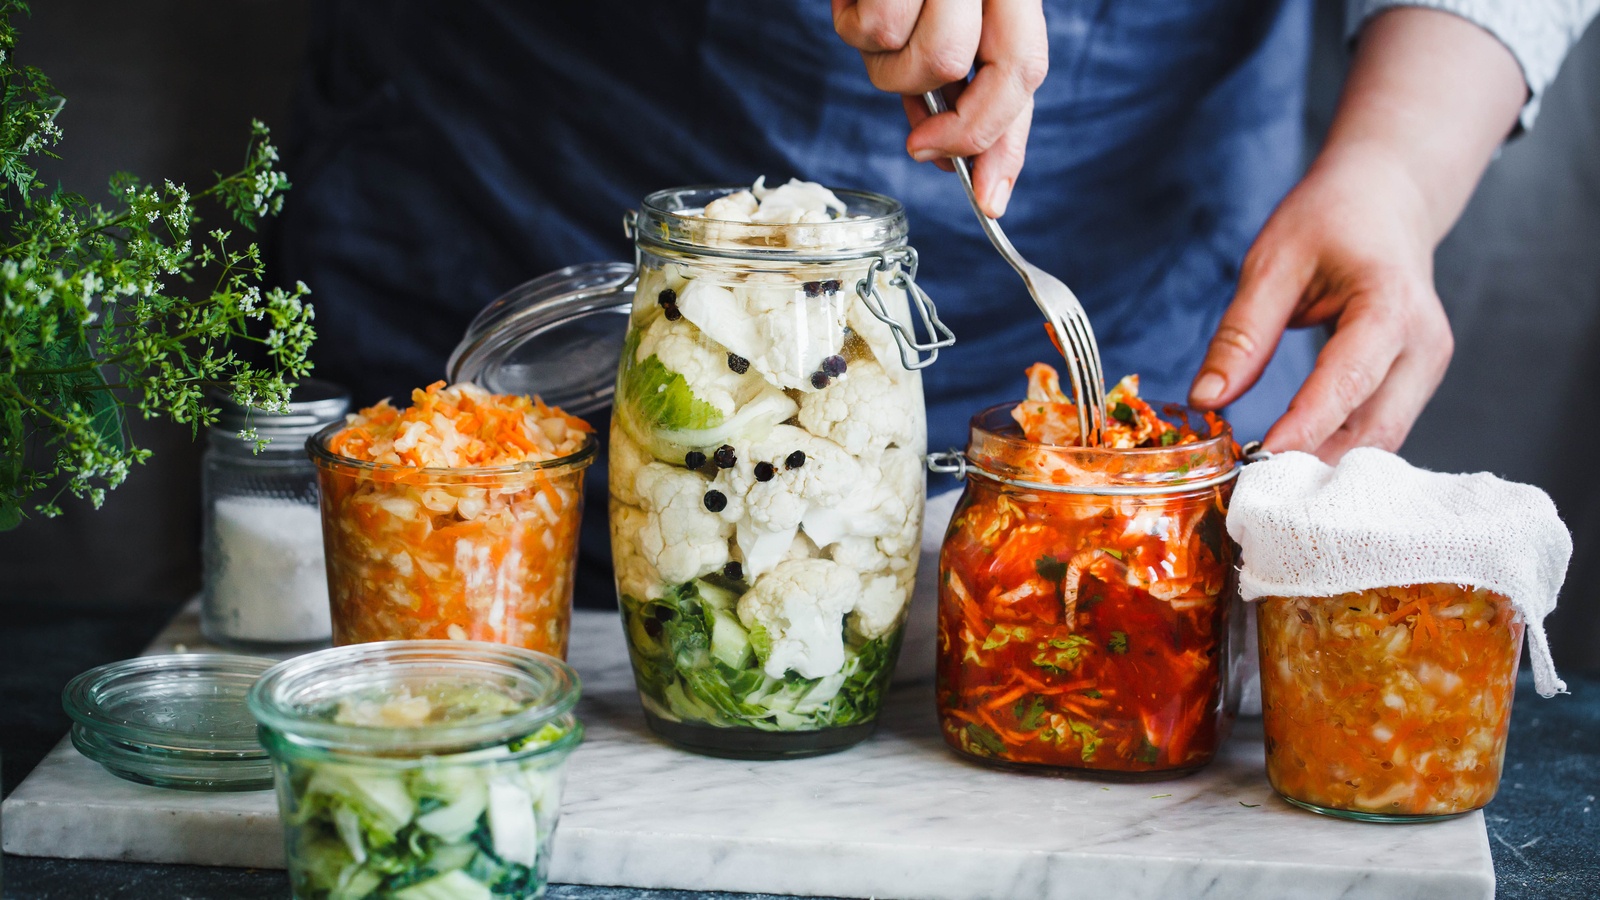 6 Health Benefits of Fermented Foods